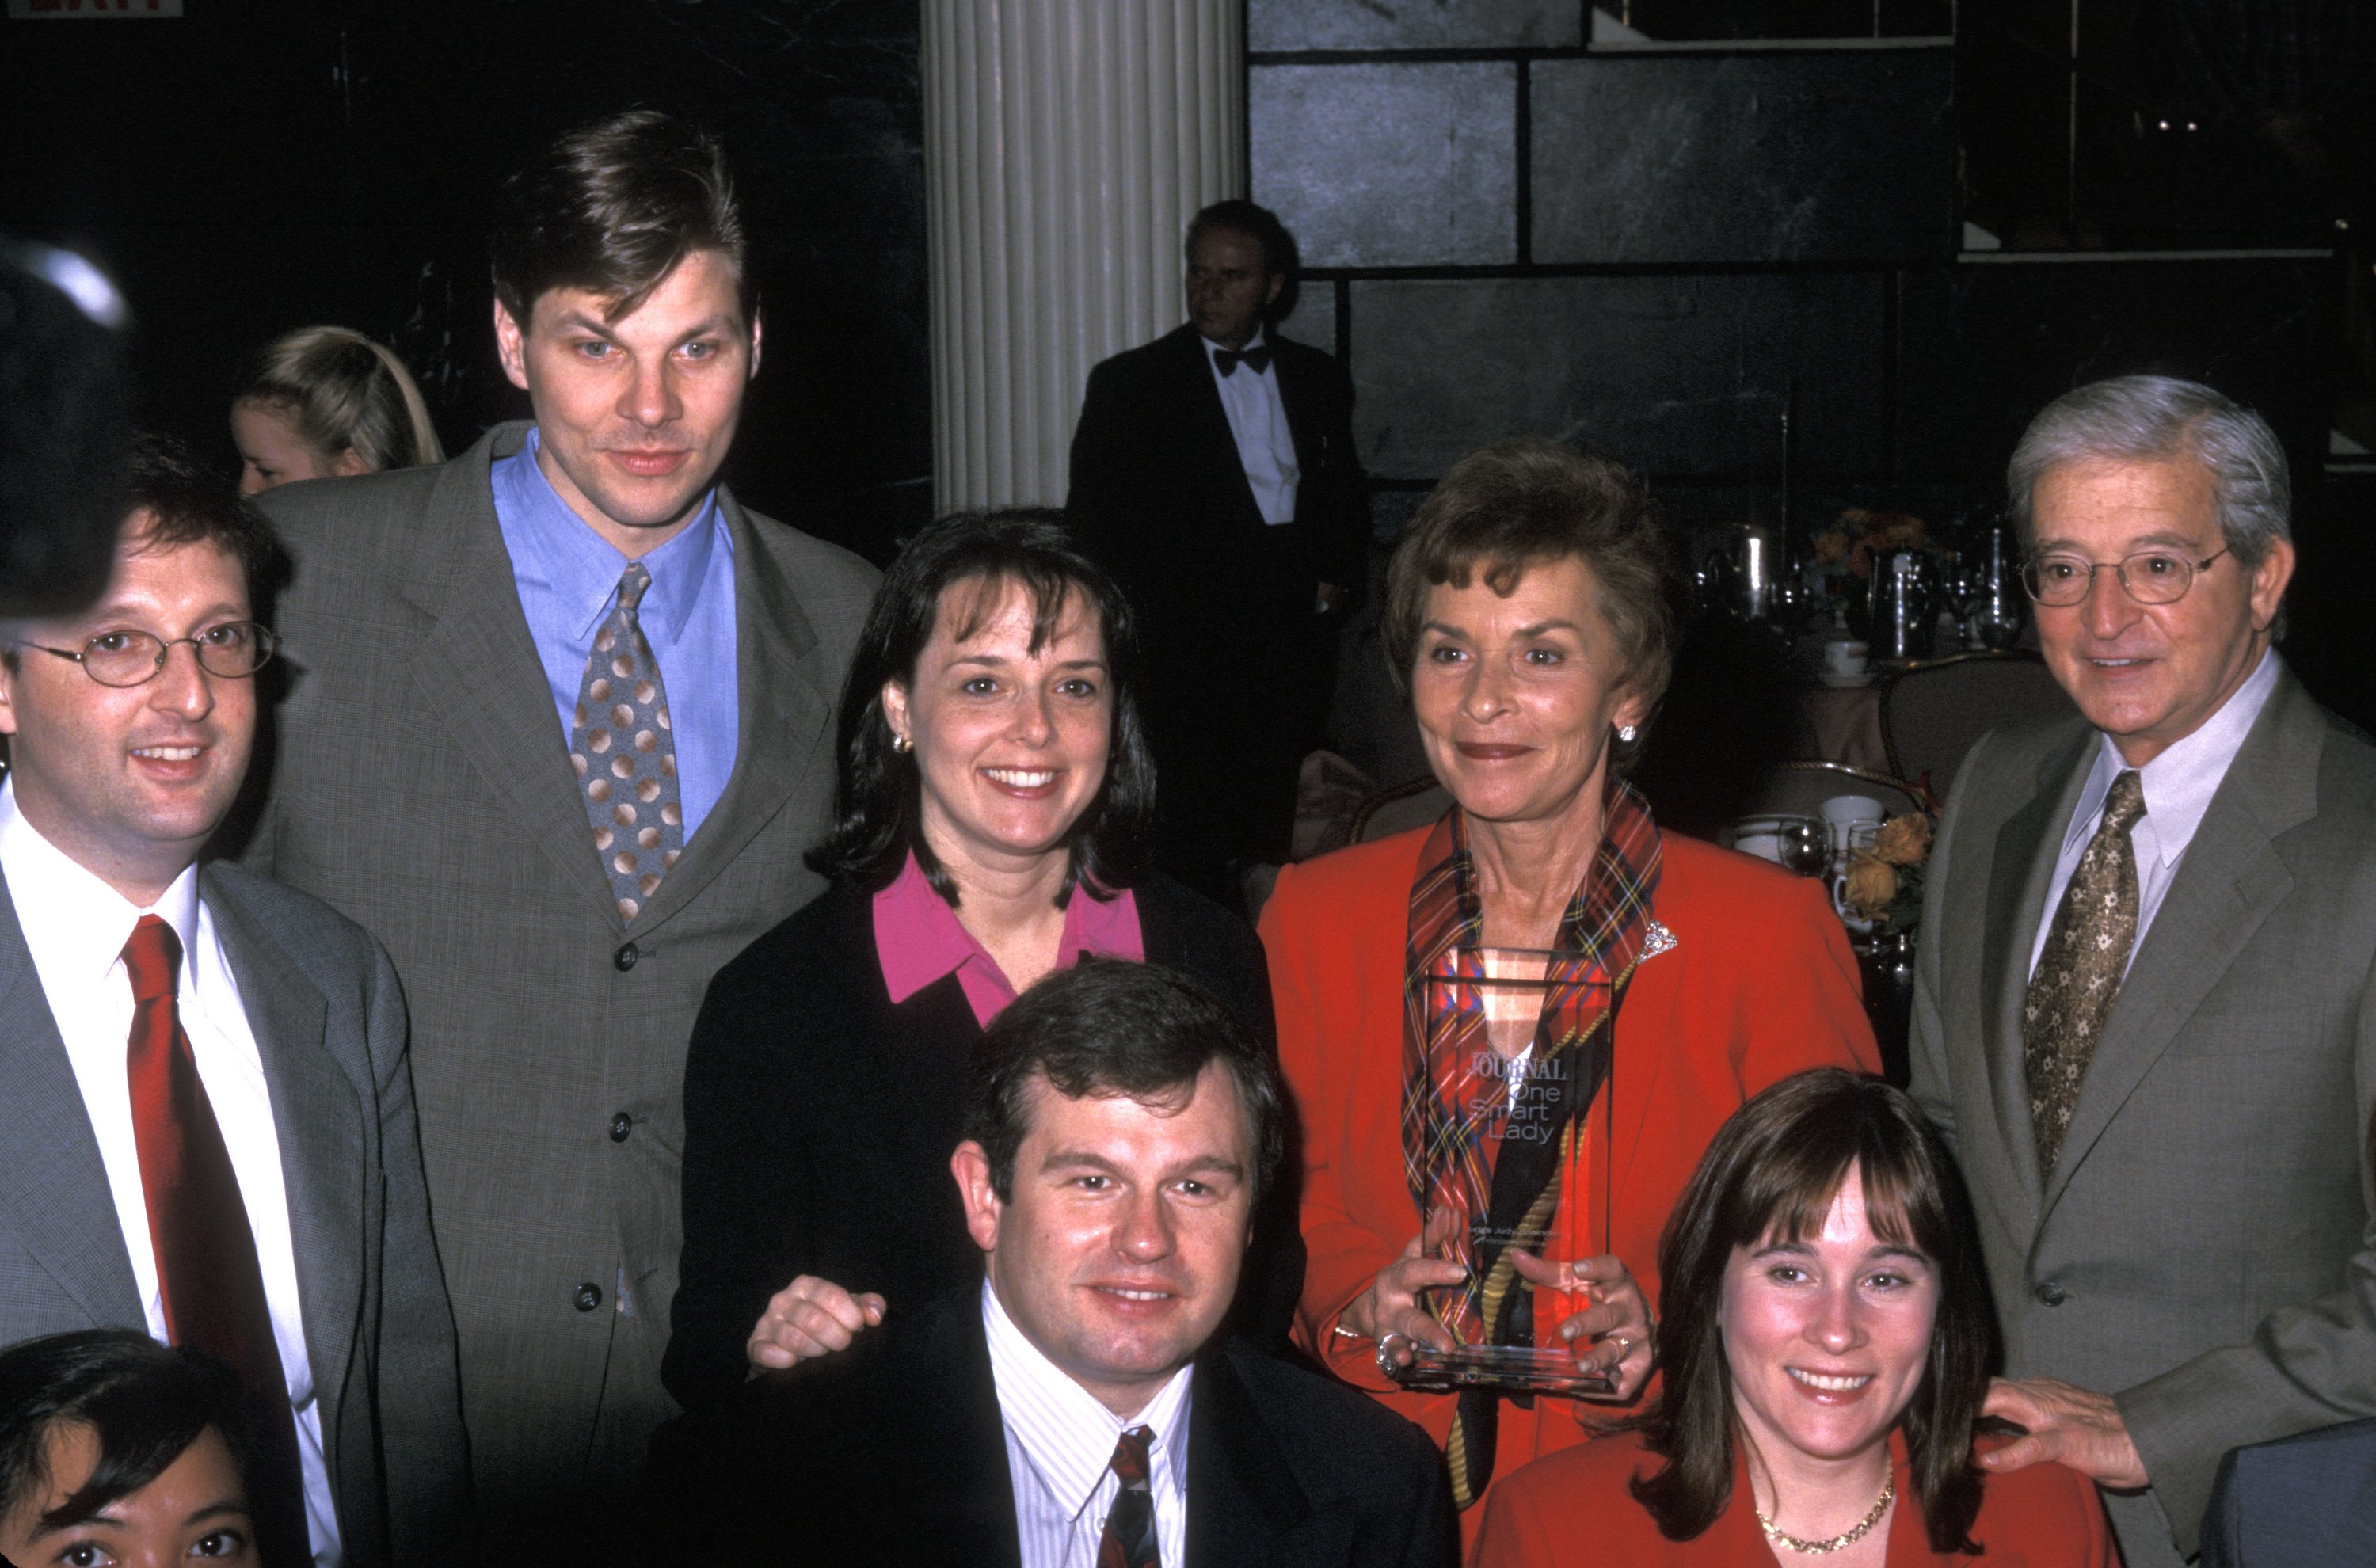  Judy Sheindlin, Jerry Sheindlin and family attend Ladies' Home Journal "One Smart Lady Award" on February 23, 2000 at the Waldorf Astoria Hotel in New York City.  | Source: Getty Images